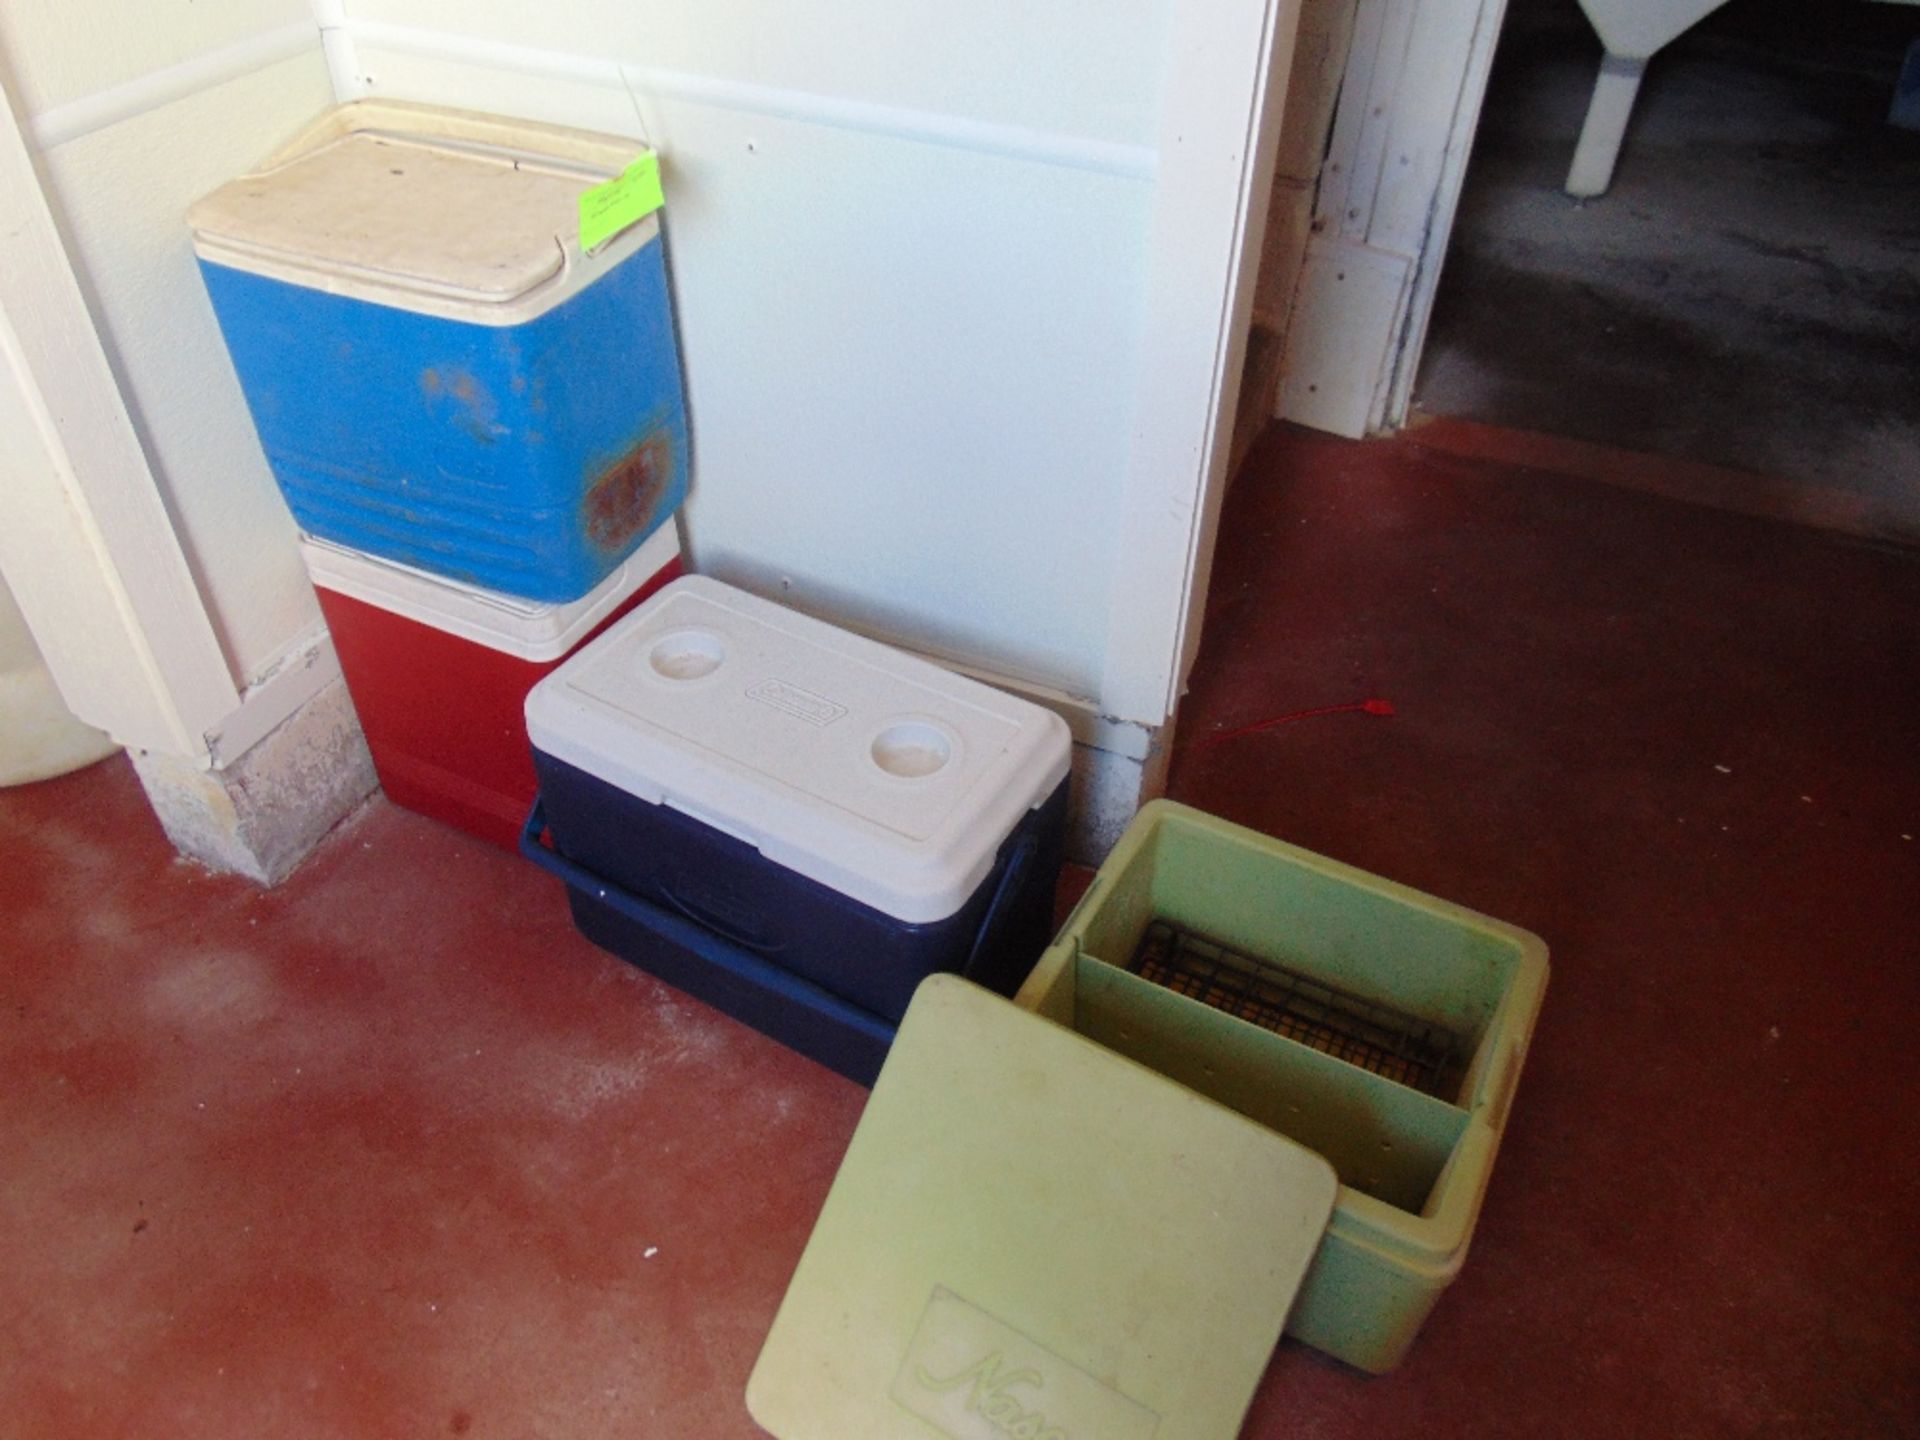 Lot of 3 Coolers and 1 Sample Box